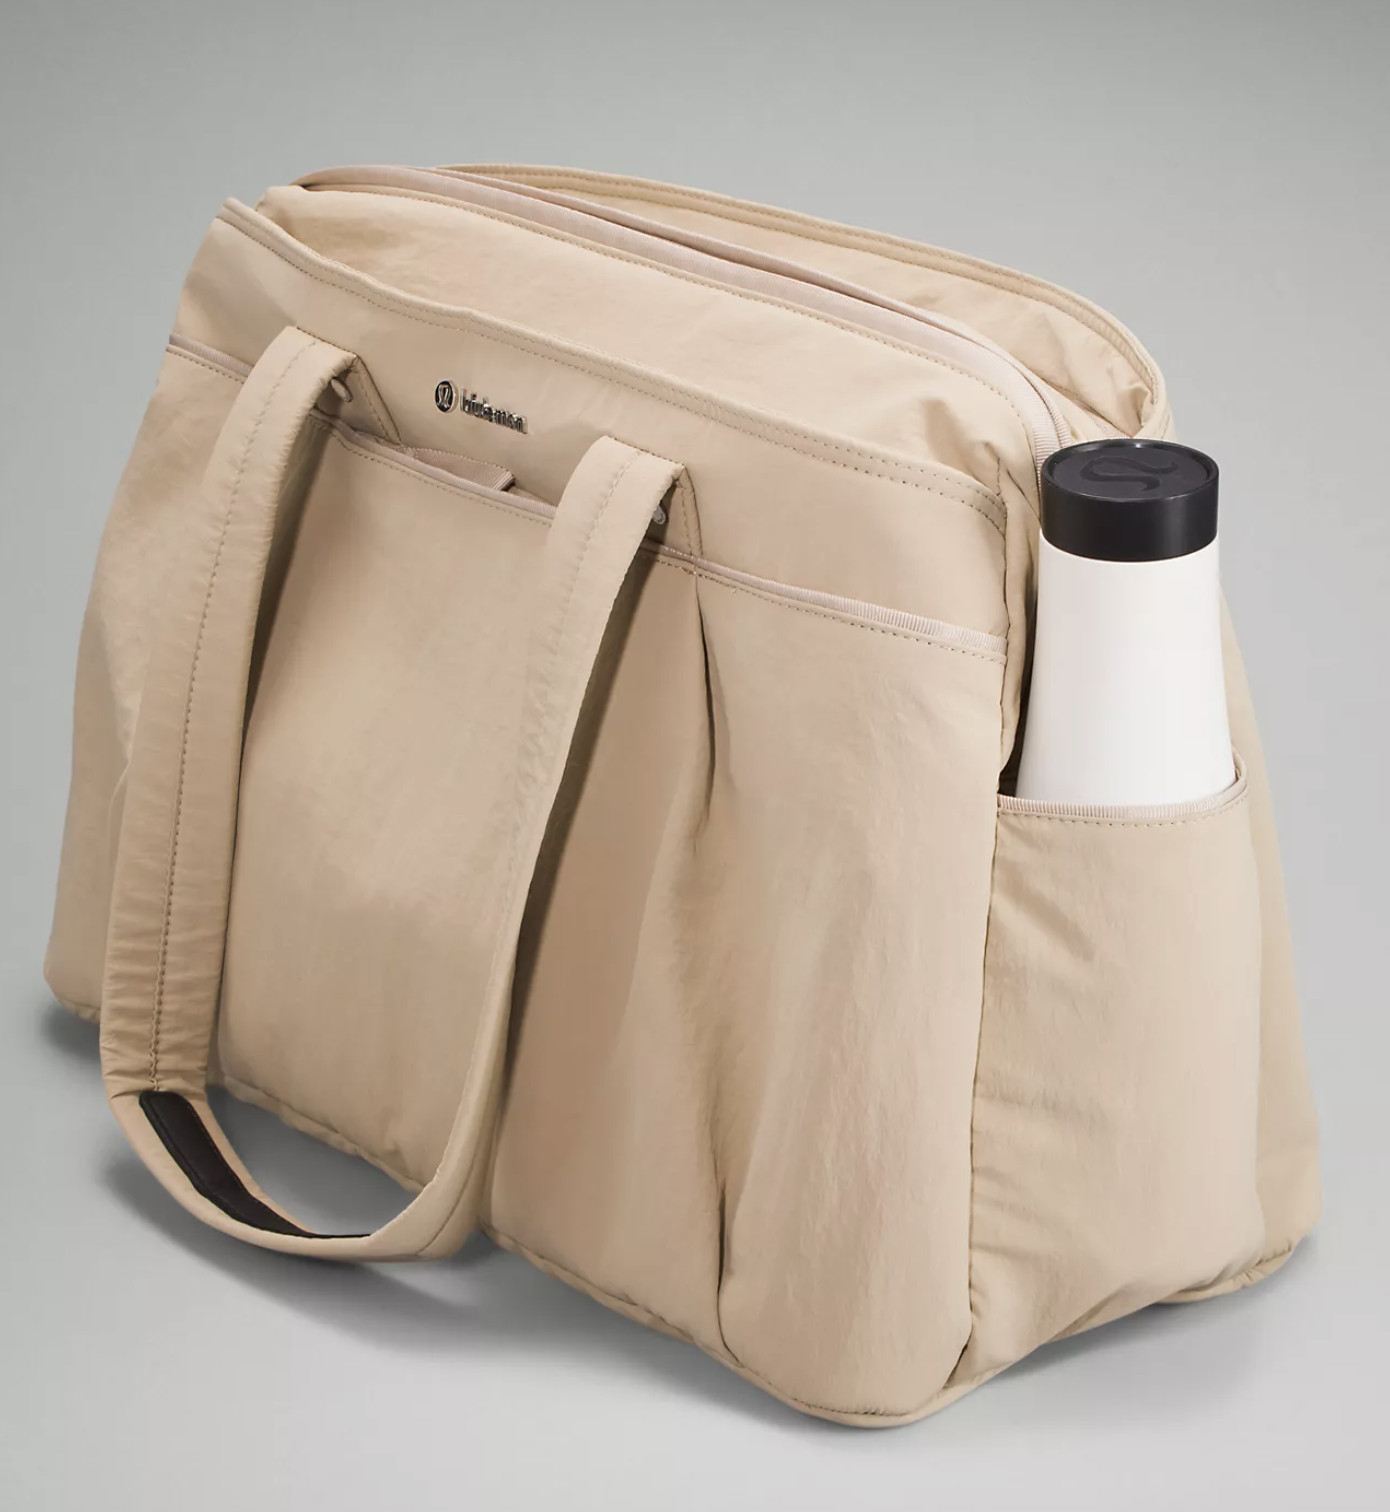 The bag with a water bottle in the pocket